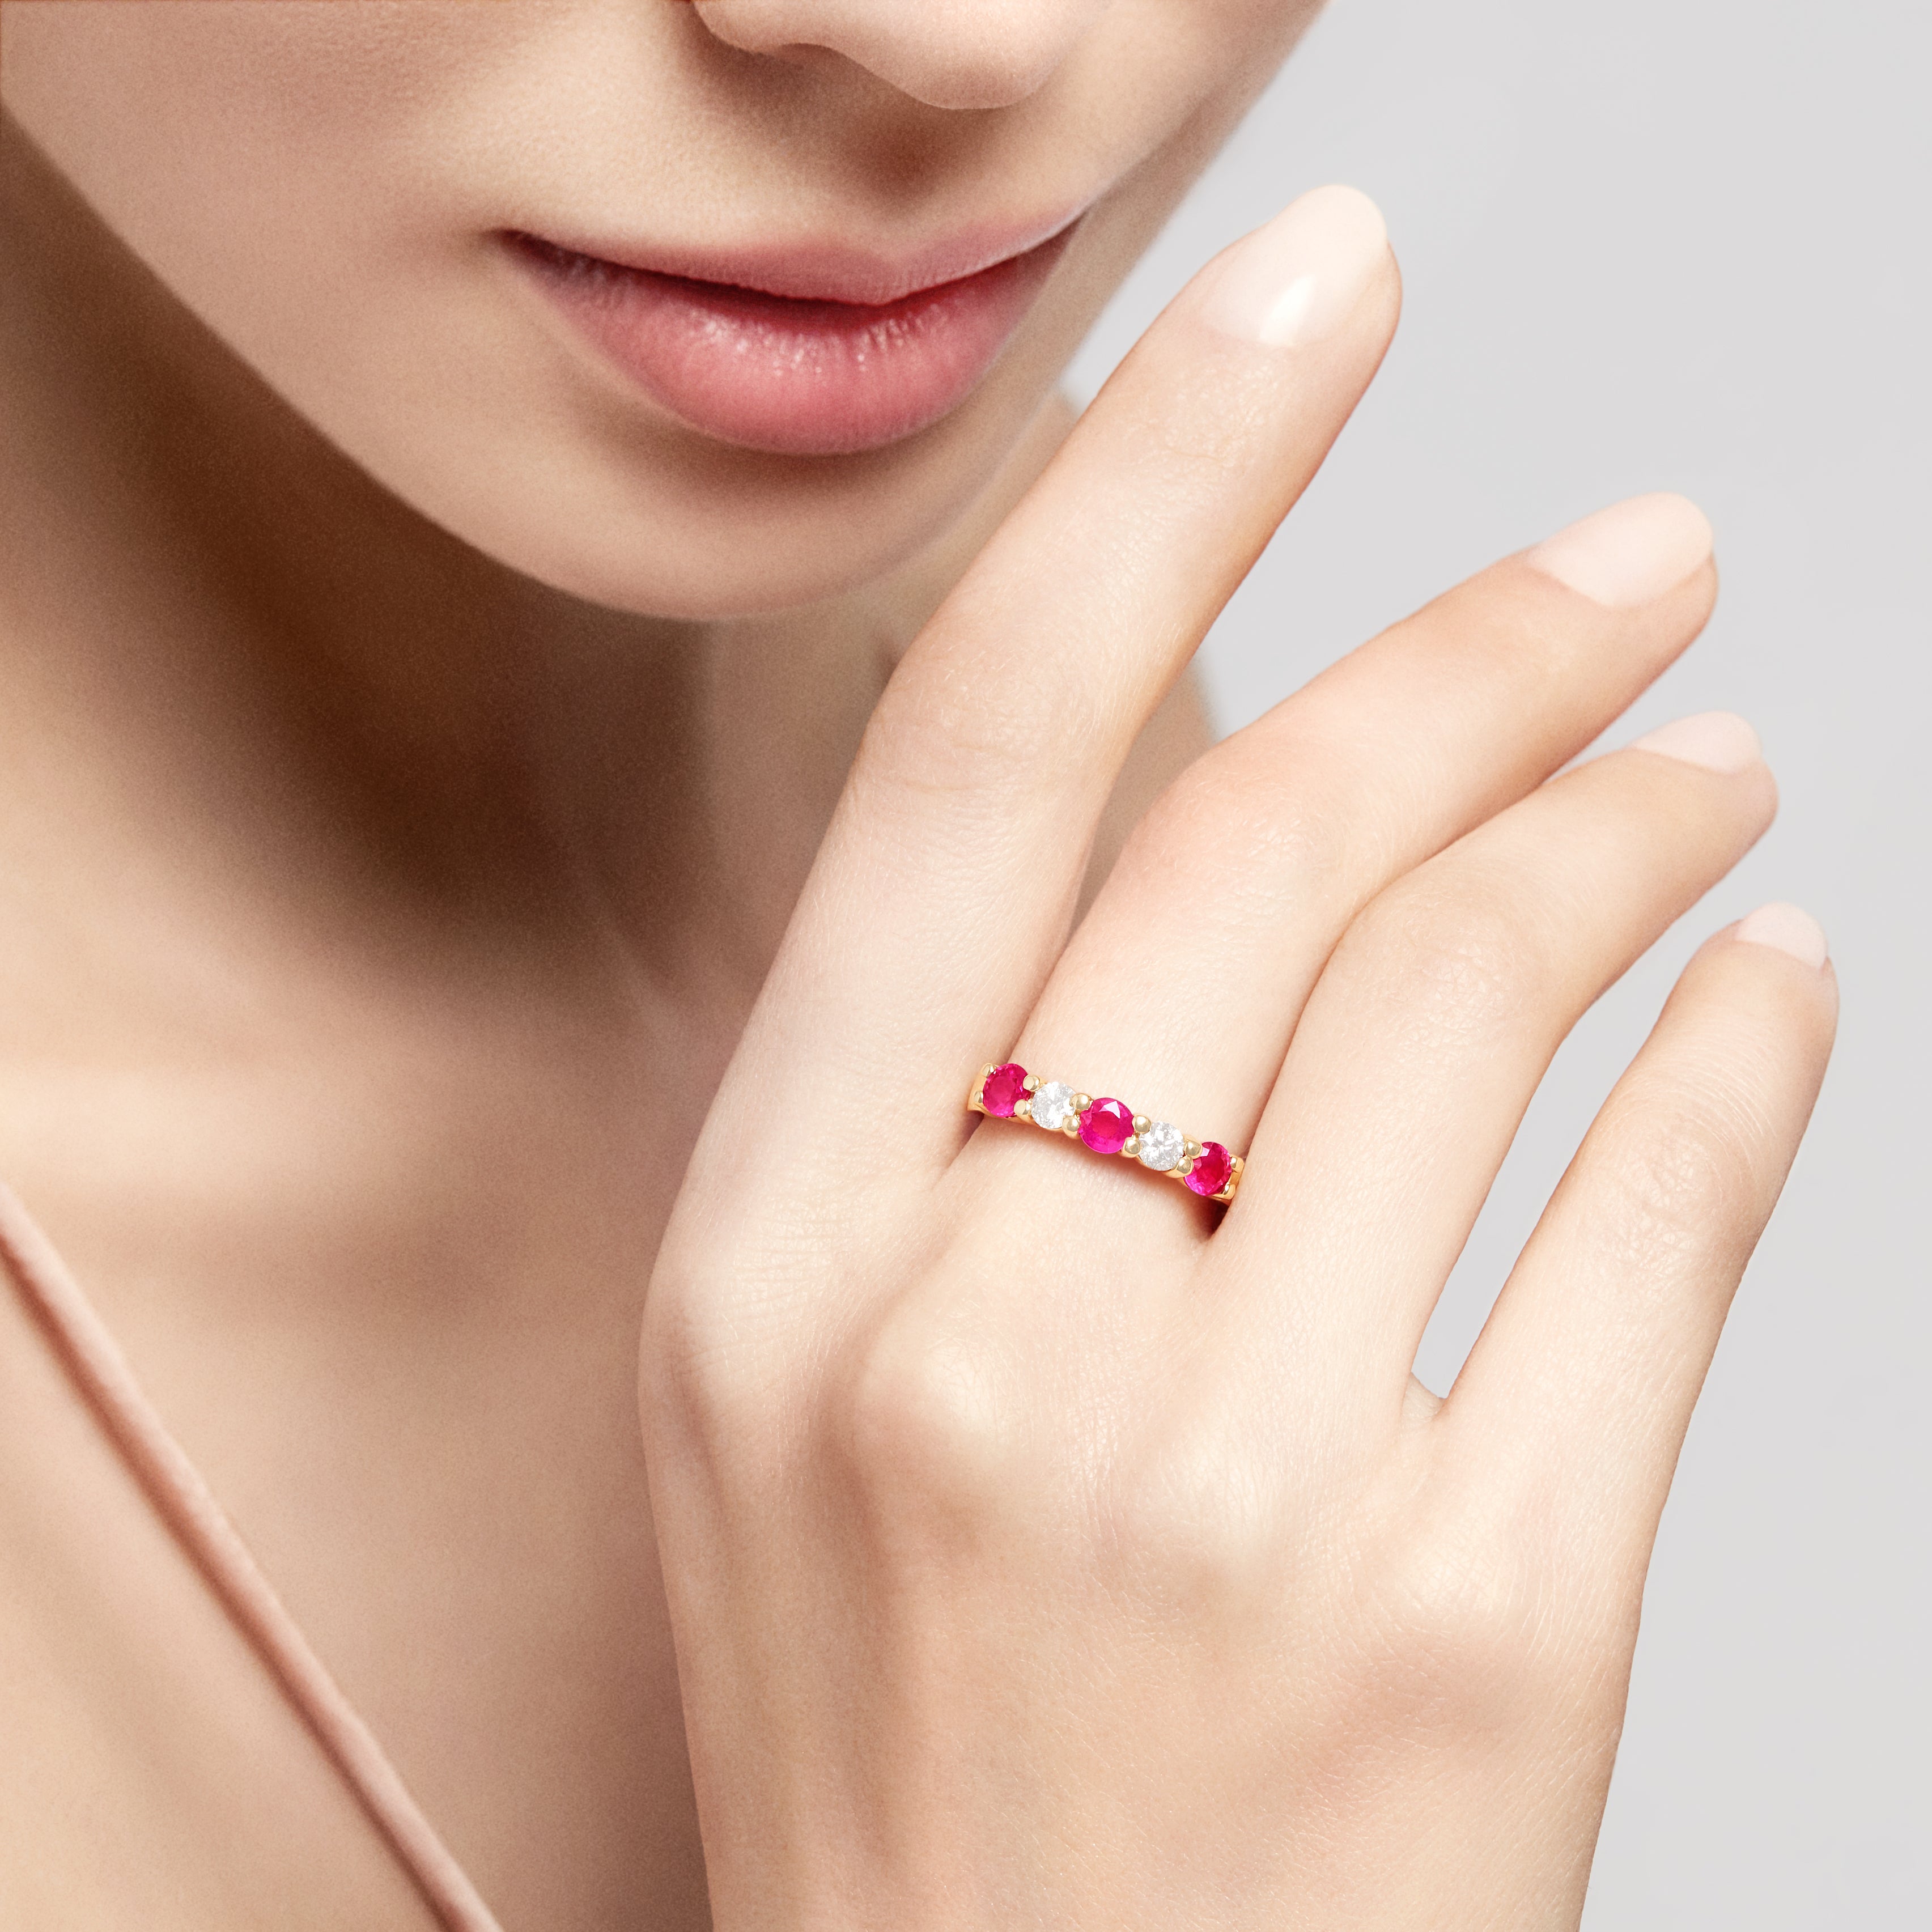 How to Choose a Ruby Engagement Ring